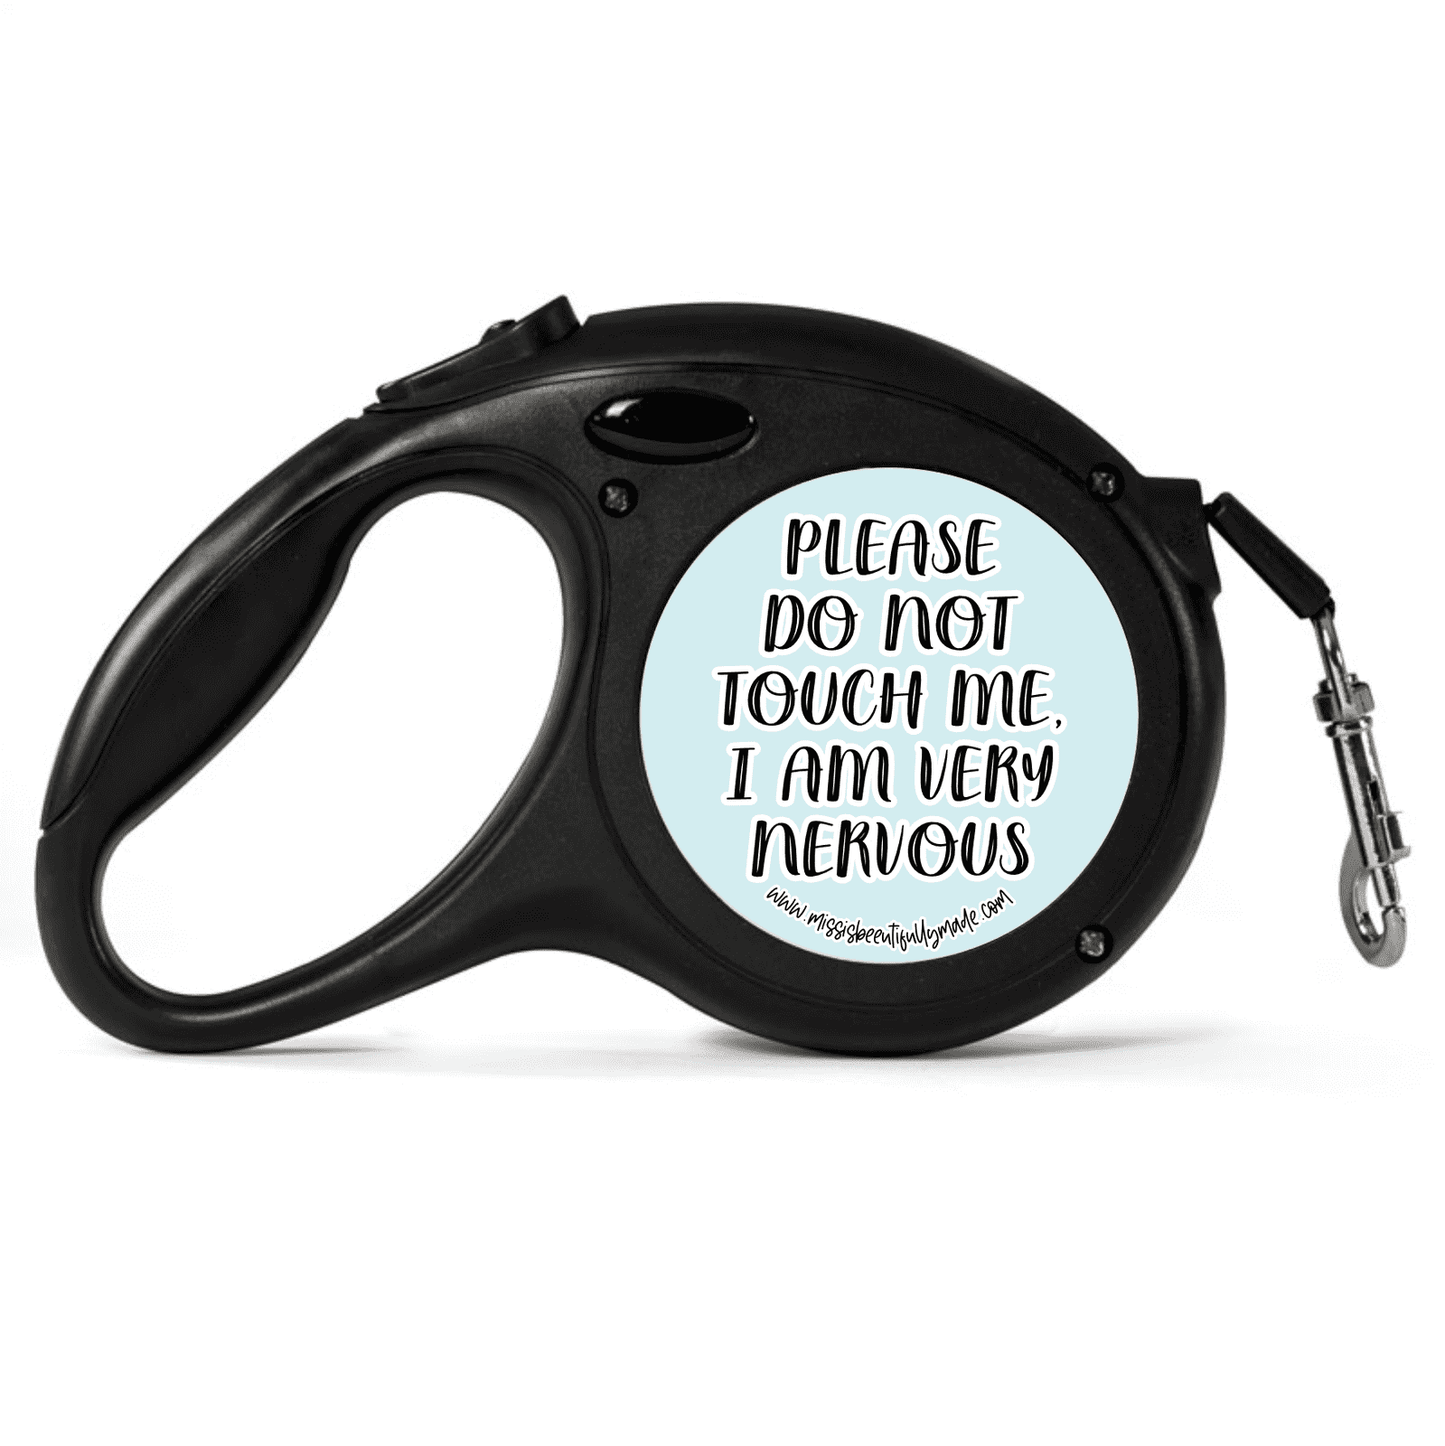 Dog Lead - Please do not touch me, i am really nervous (Black)